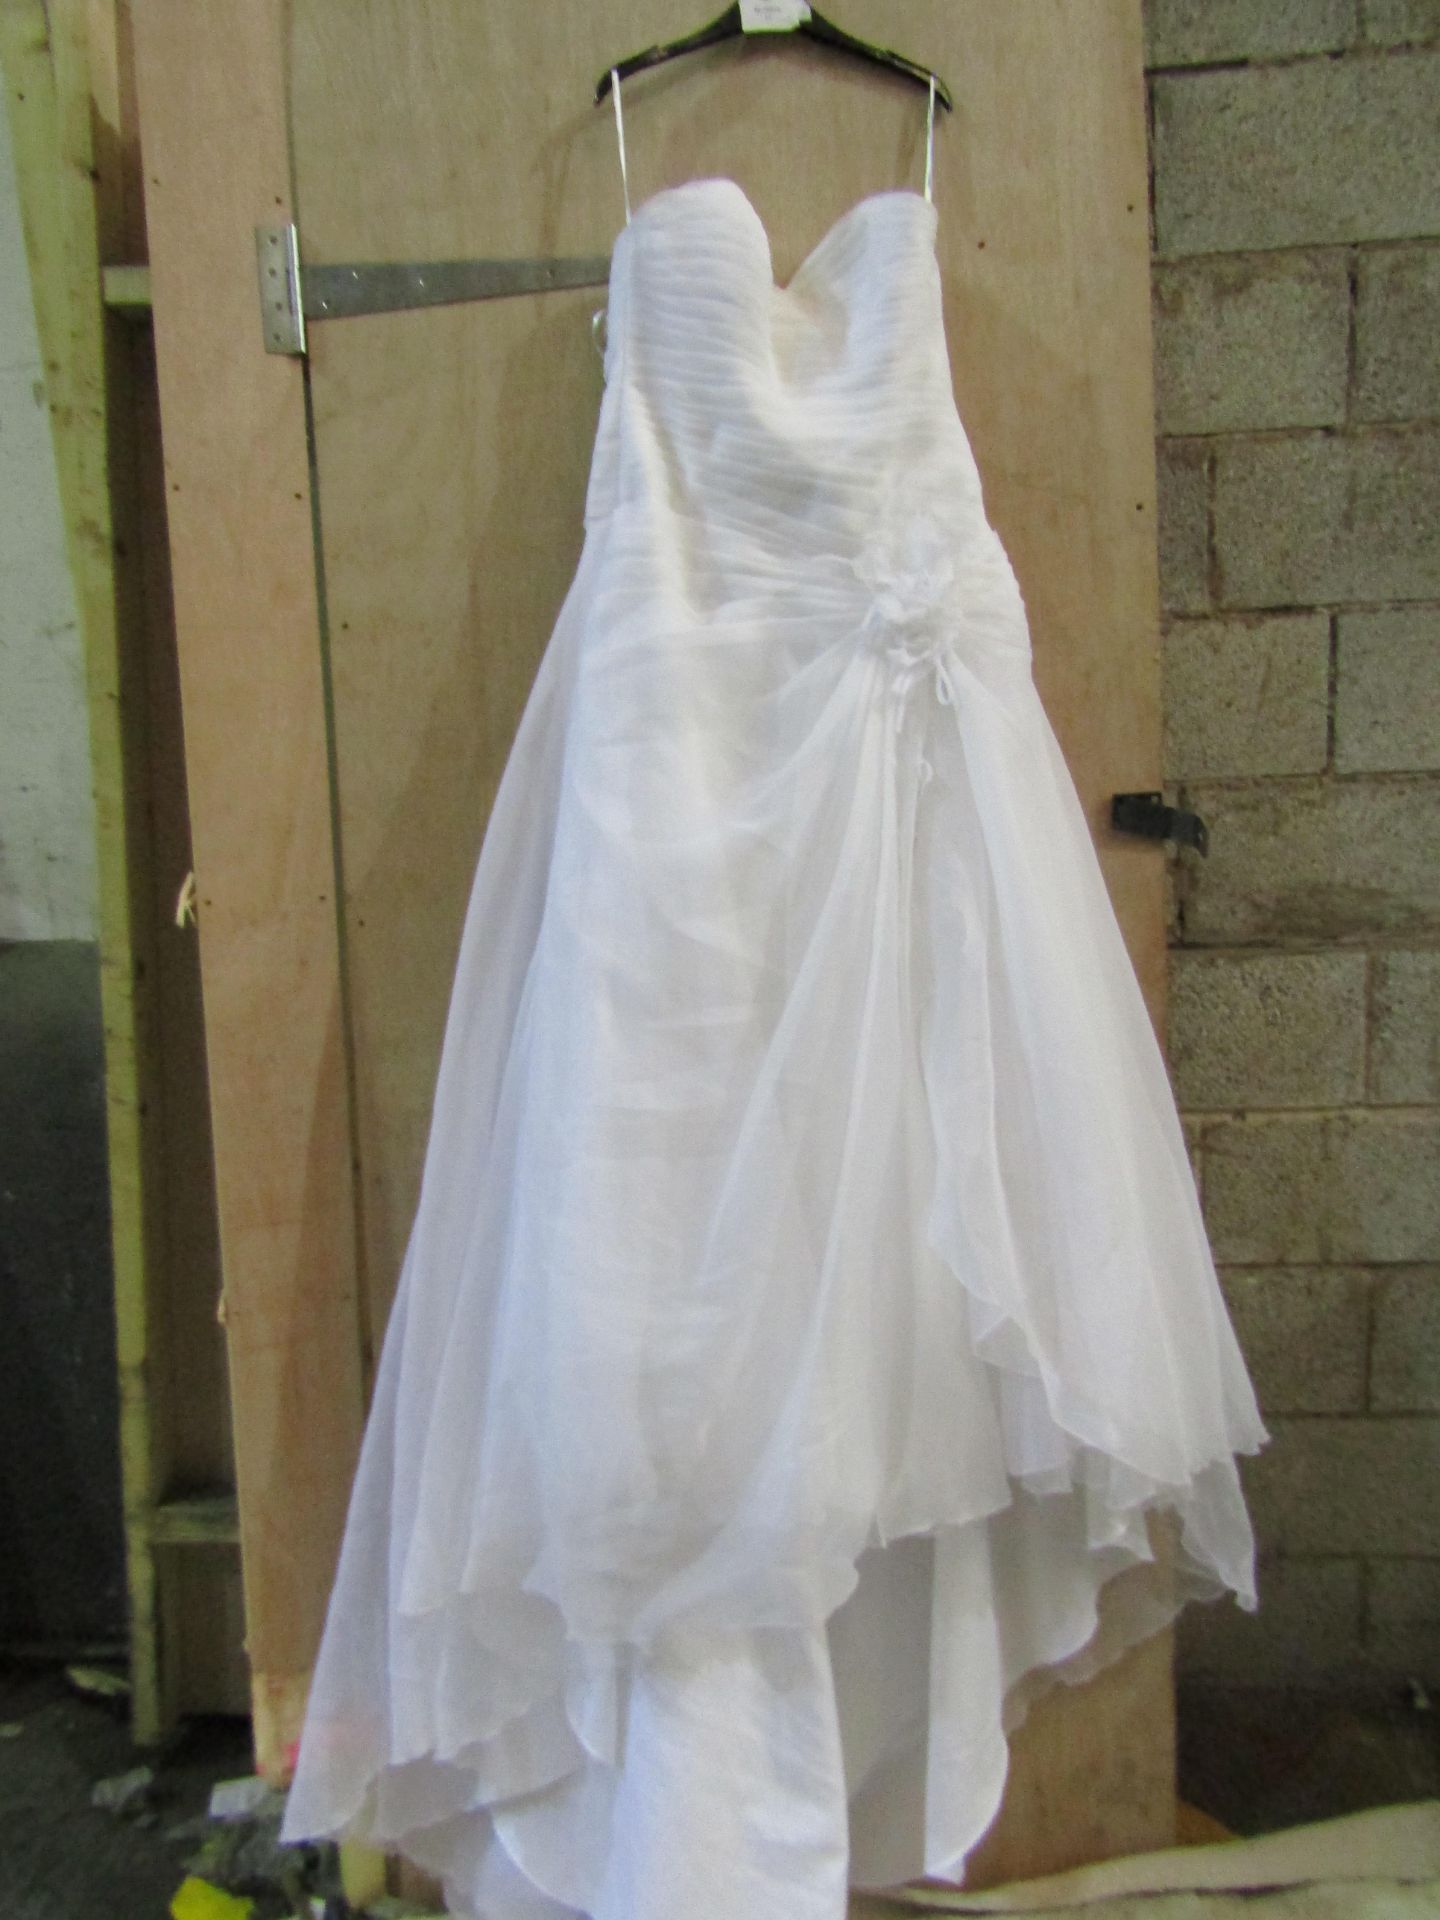 Approx 500 pieces of wedding shop stock to include wedding dresses, mother of the bride, dresses, - Image 86 of 108